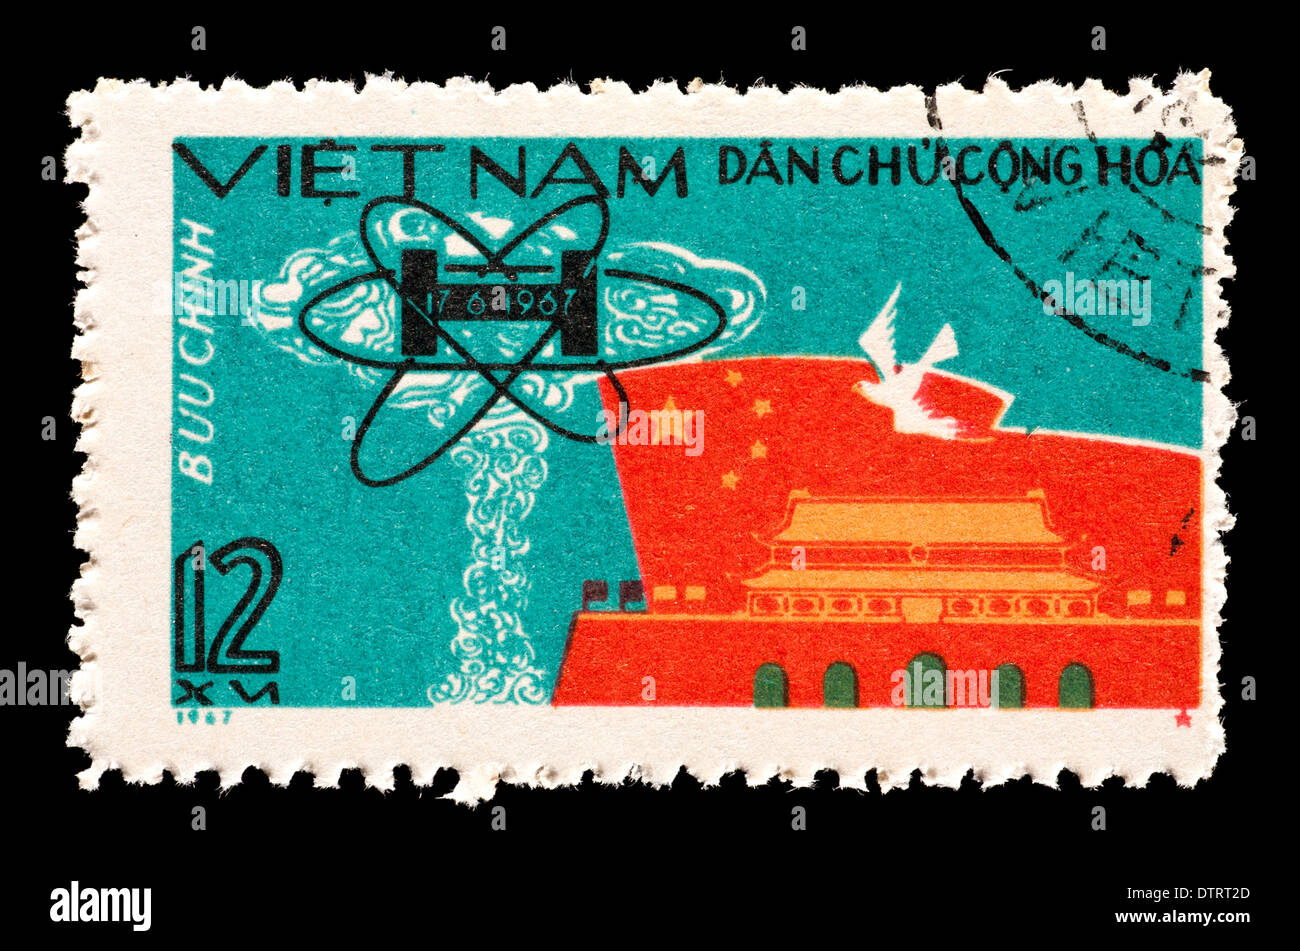 Postage stamp from North Vietnam depicting the first Chinese hydrogen bomb test. Stock Photo